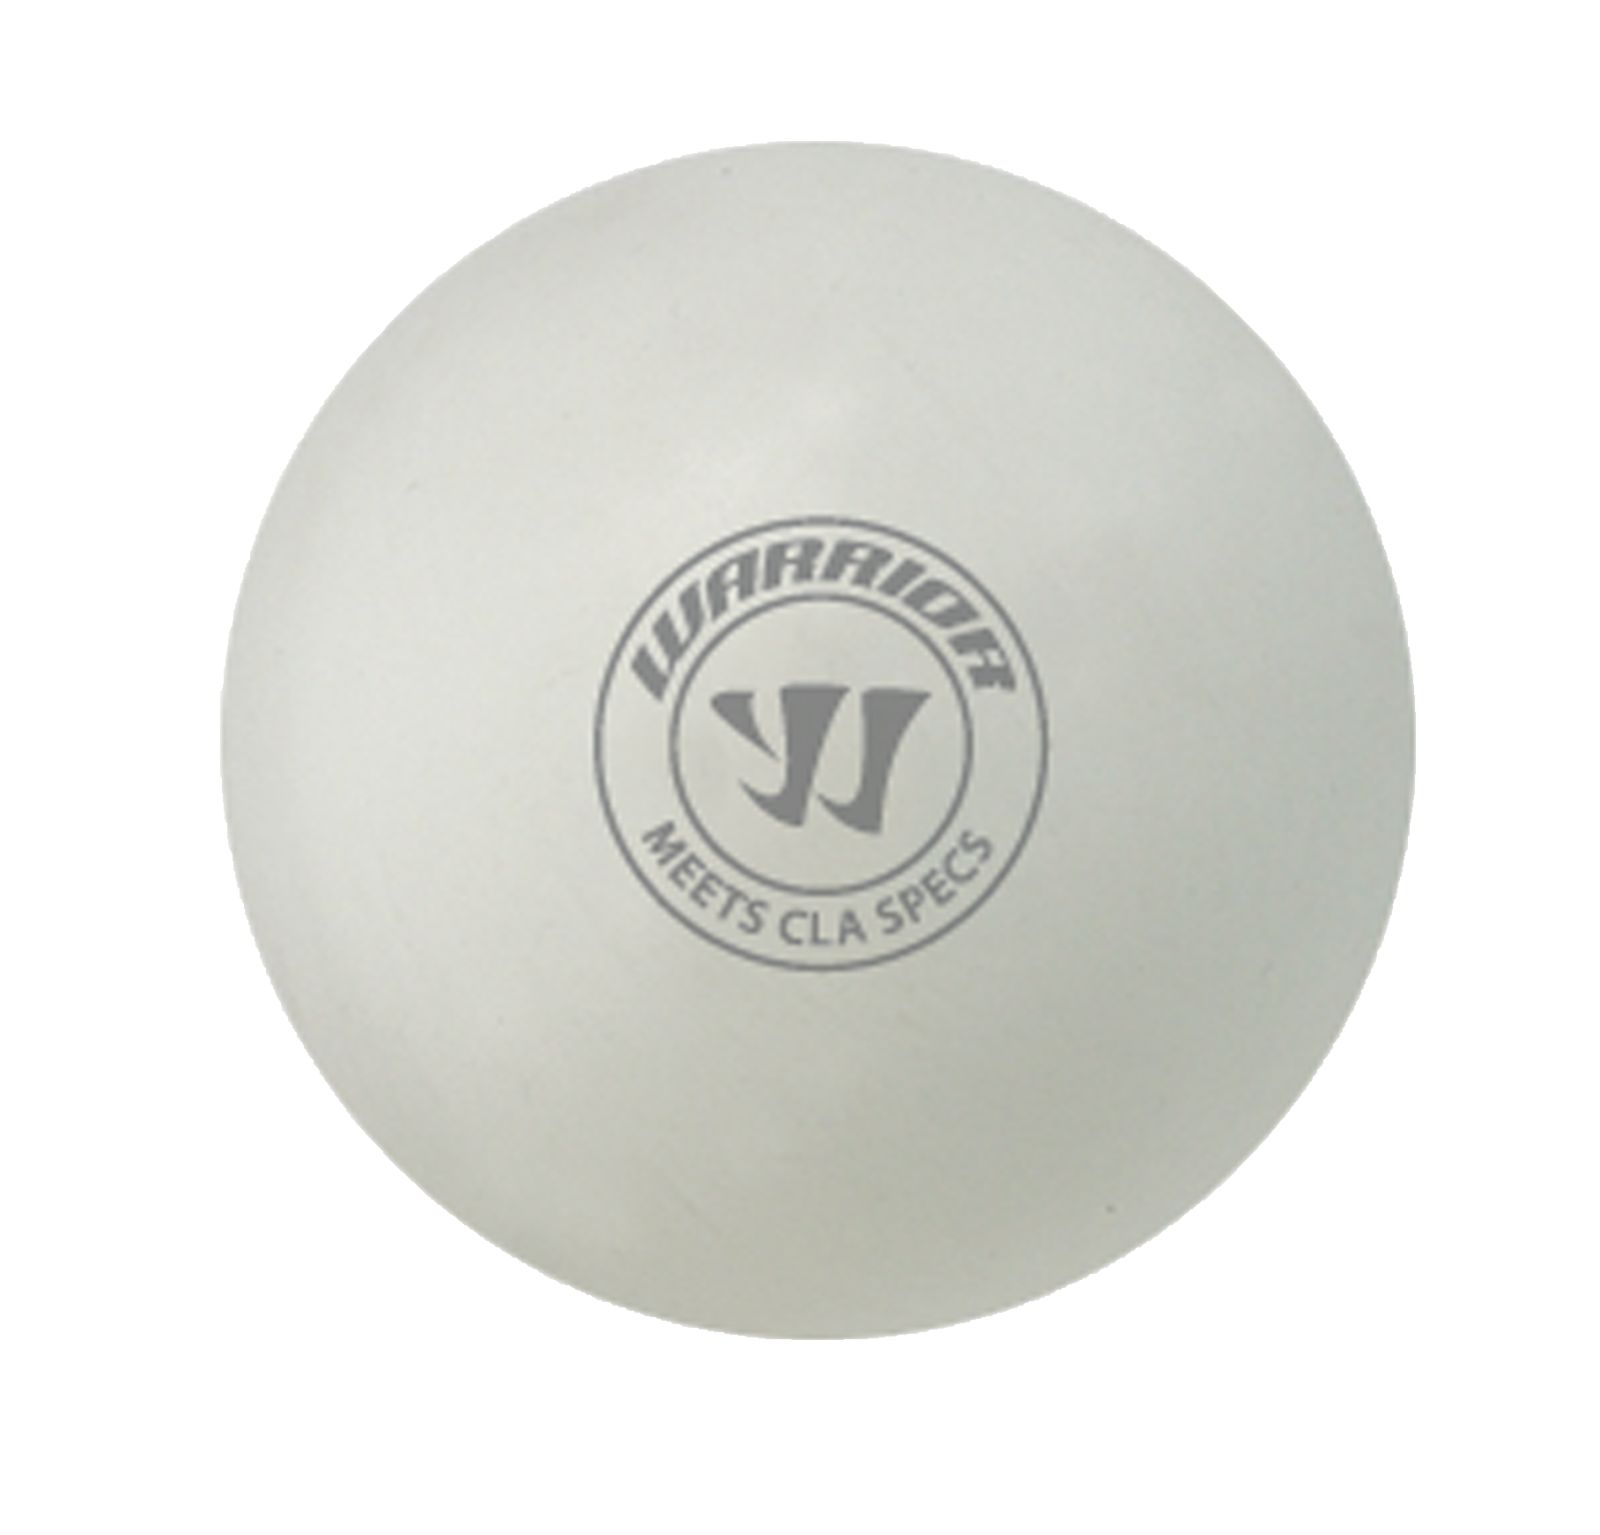 CLA APPROVED BALL - 120 BALLS/CASE, White image number 0